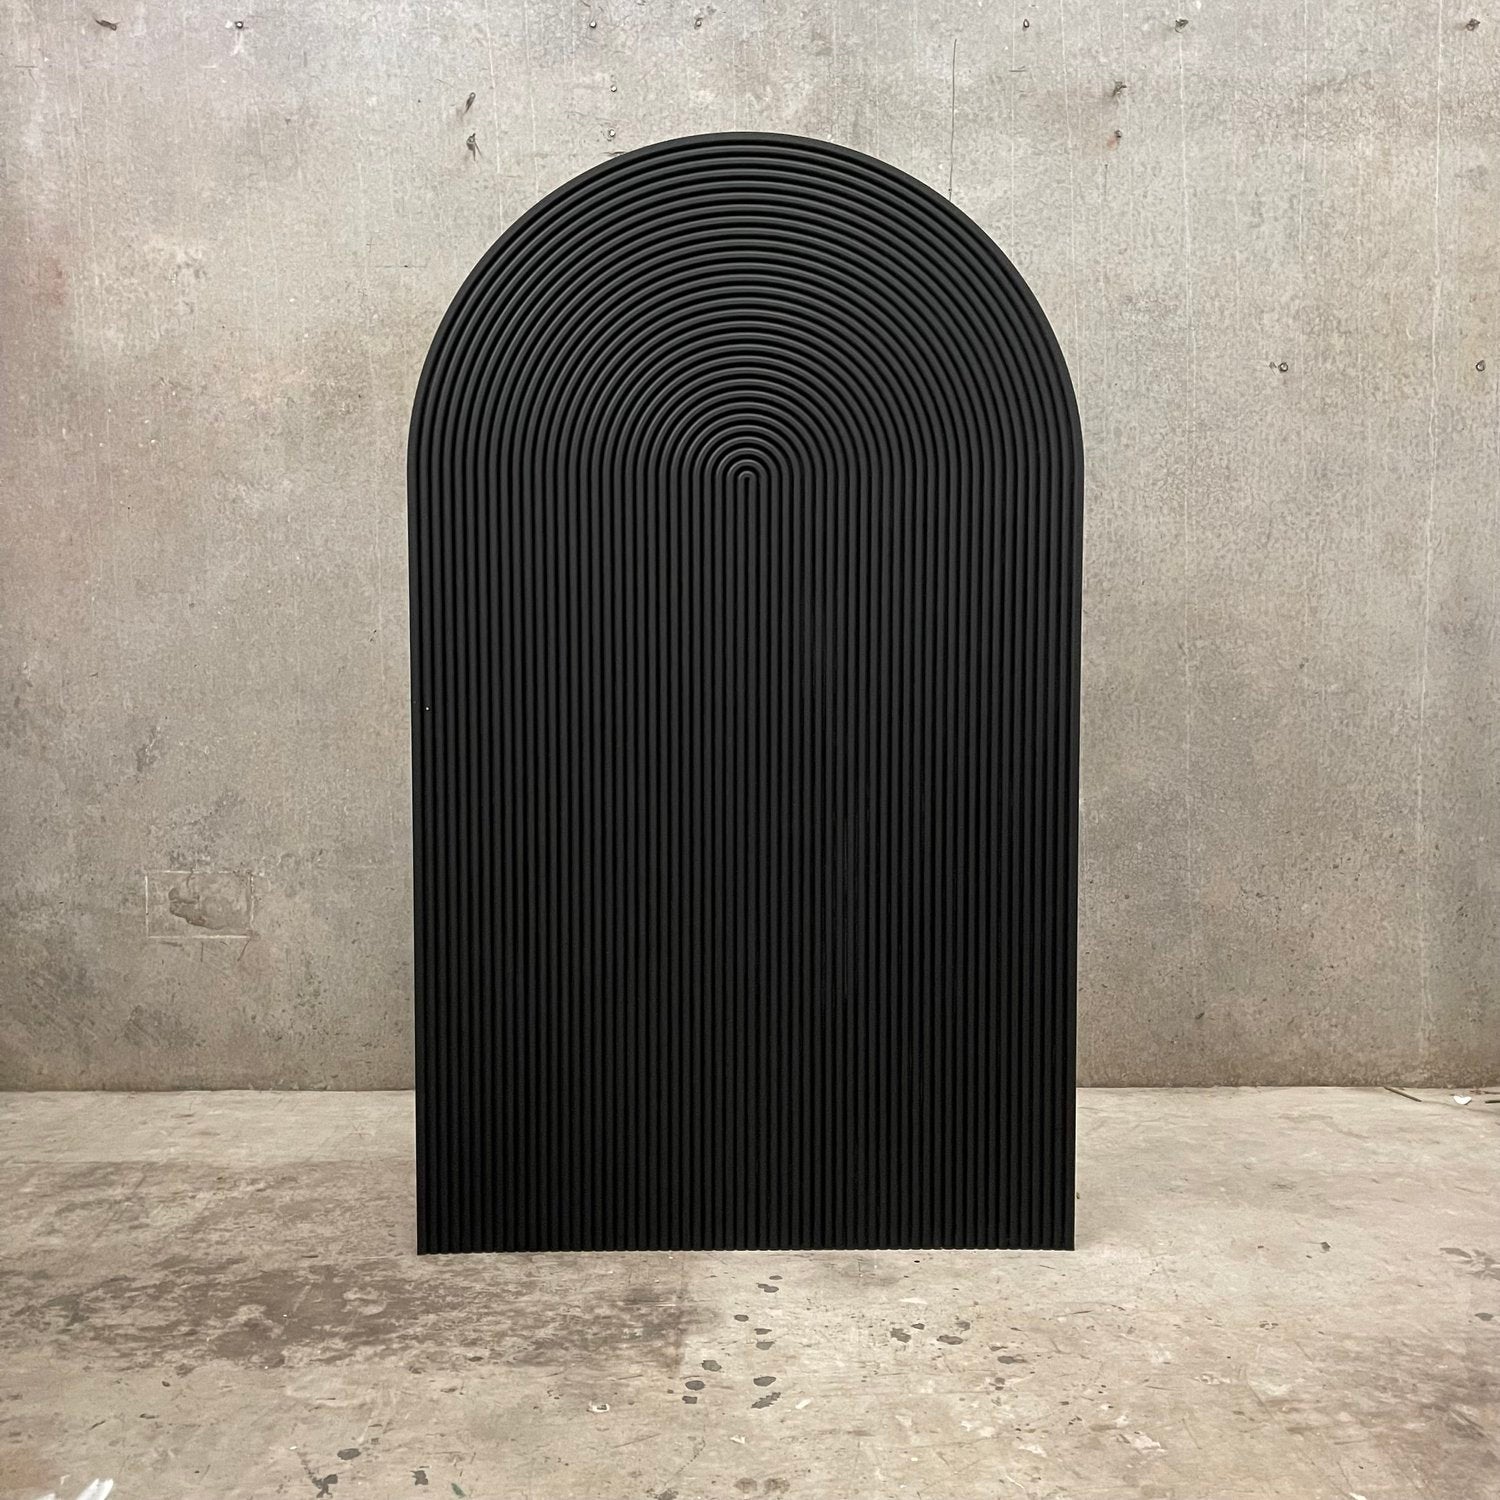 LARGE BLACK RIPPLED ARCHED BACKDROP HIRE - PLEASE EMAIL TO HIRE